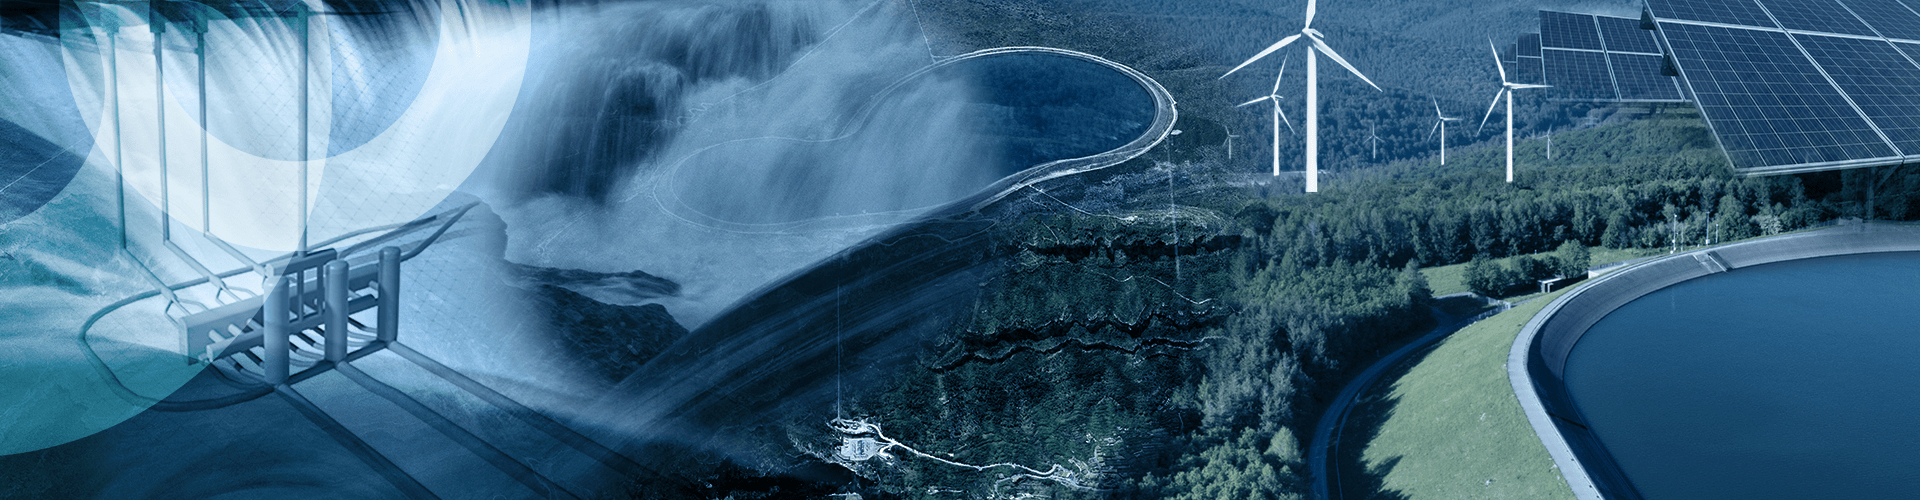 Pumped storage hydropower is critical for the Energy Transition